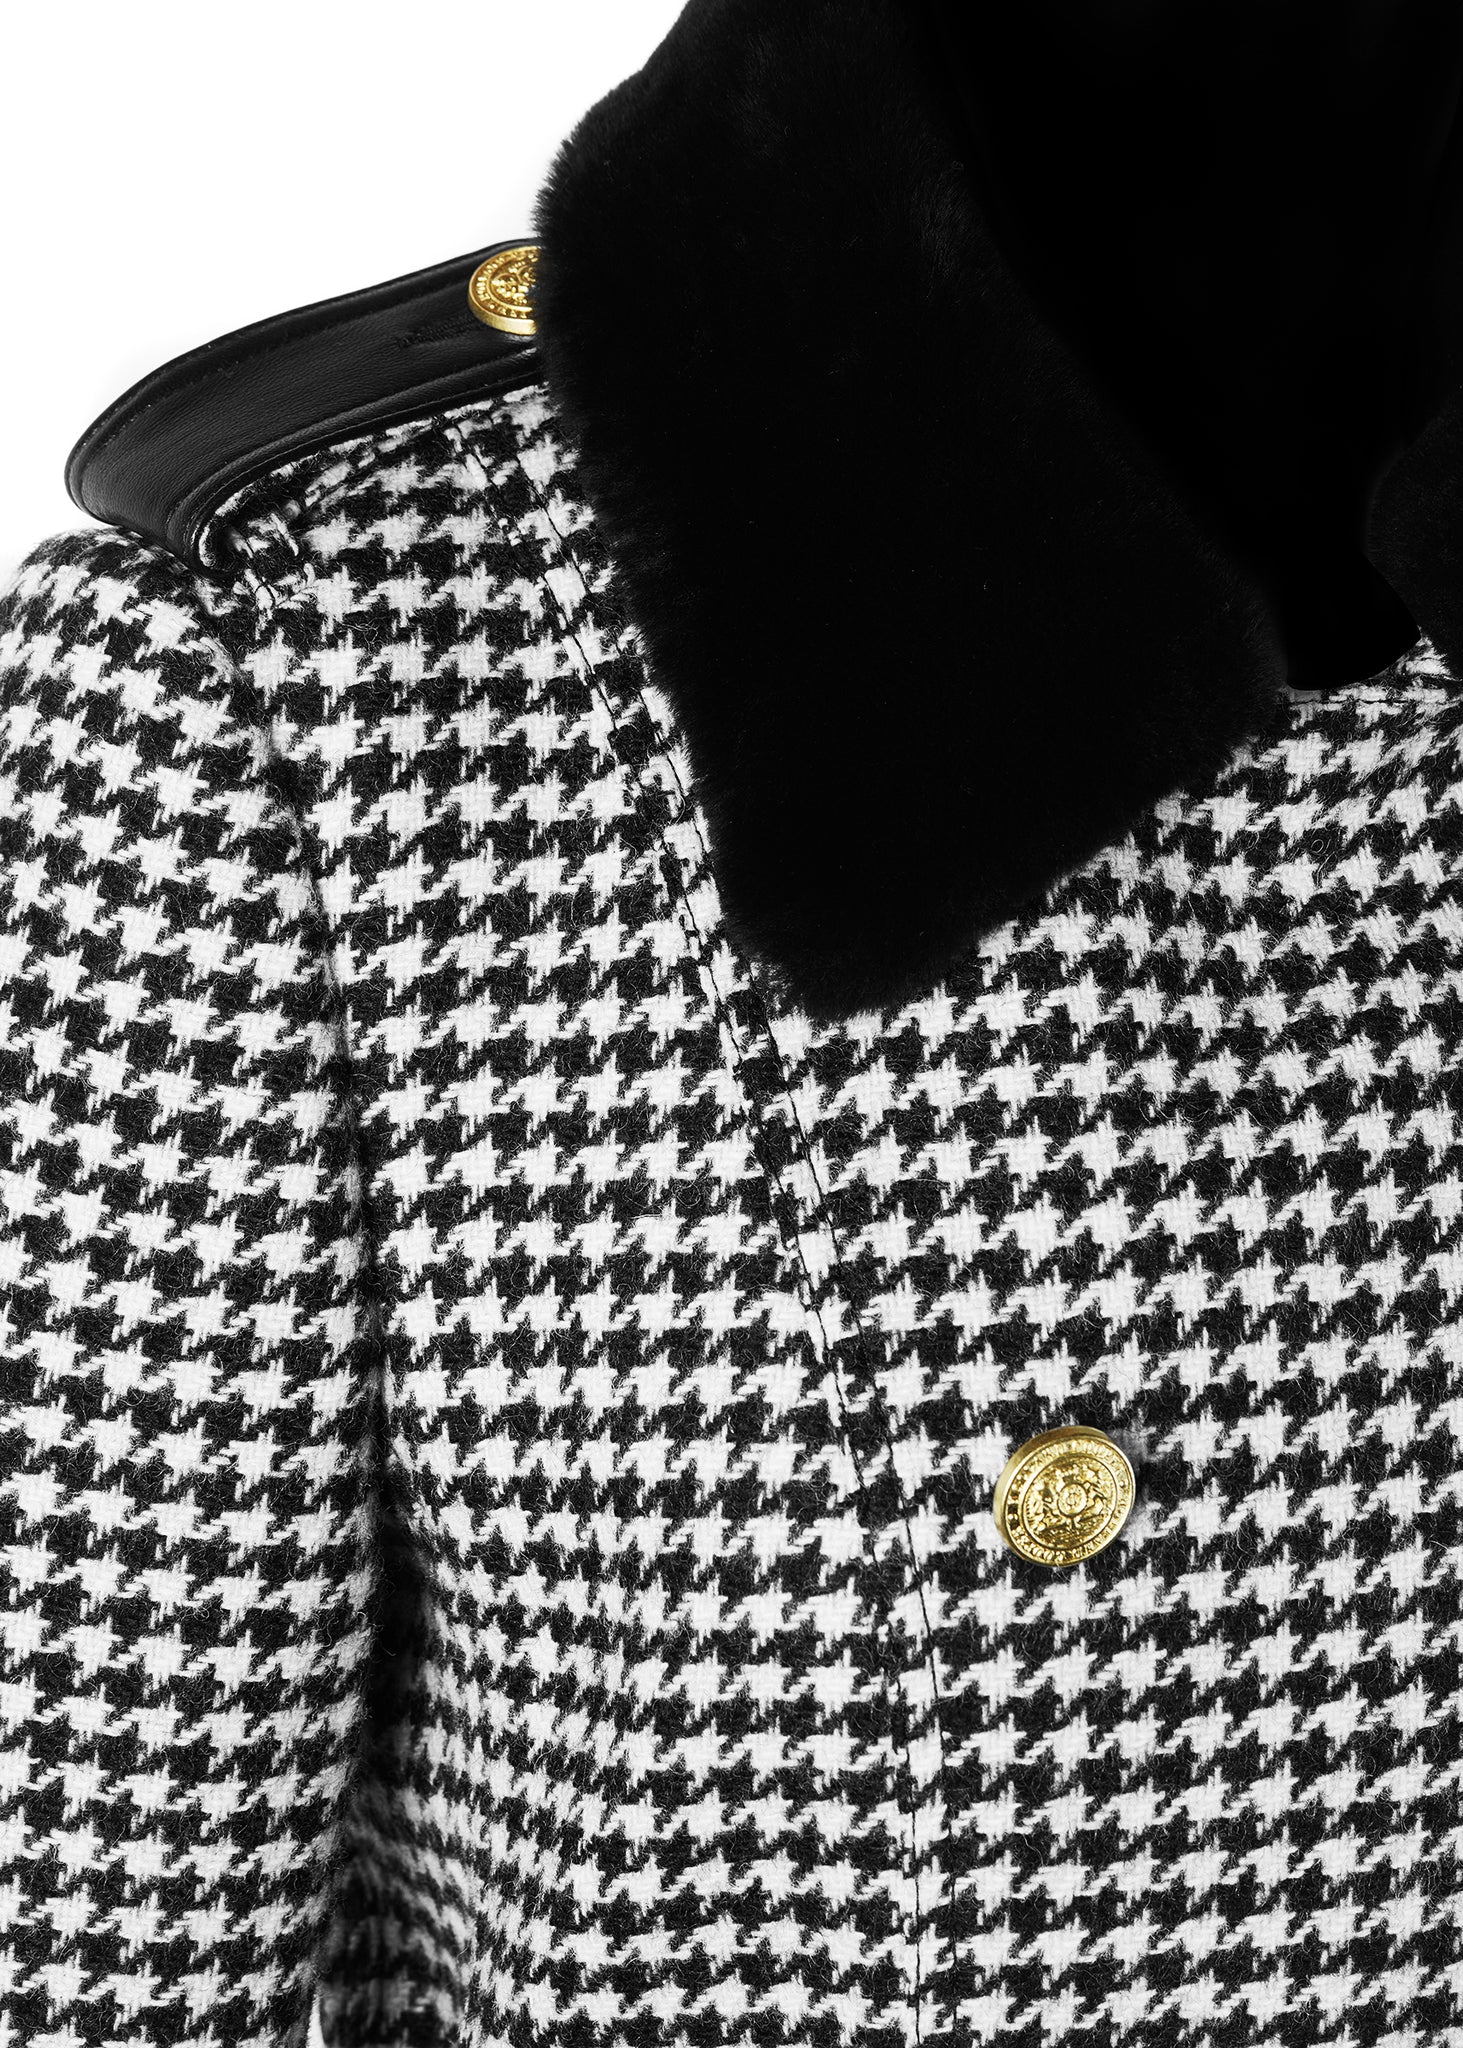 Faux black fur collar detail on womens black and white houndstooth double breasted full length trench coat with black faux fur collar and cuffs